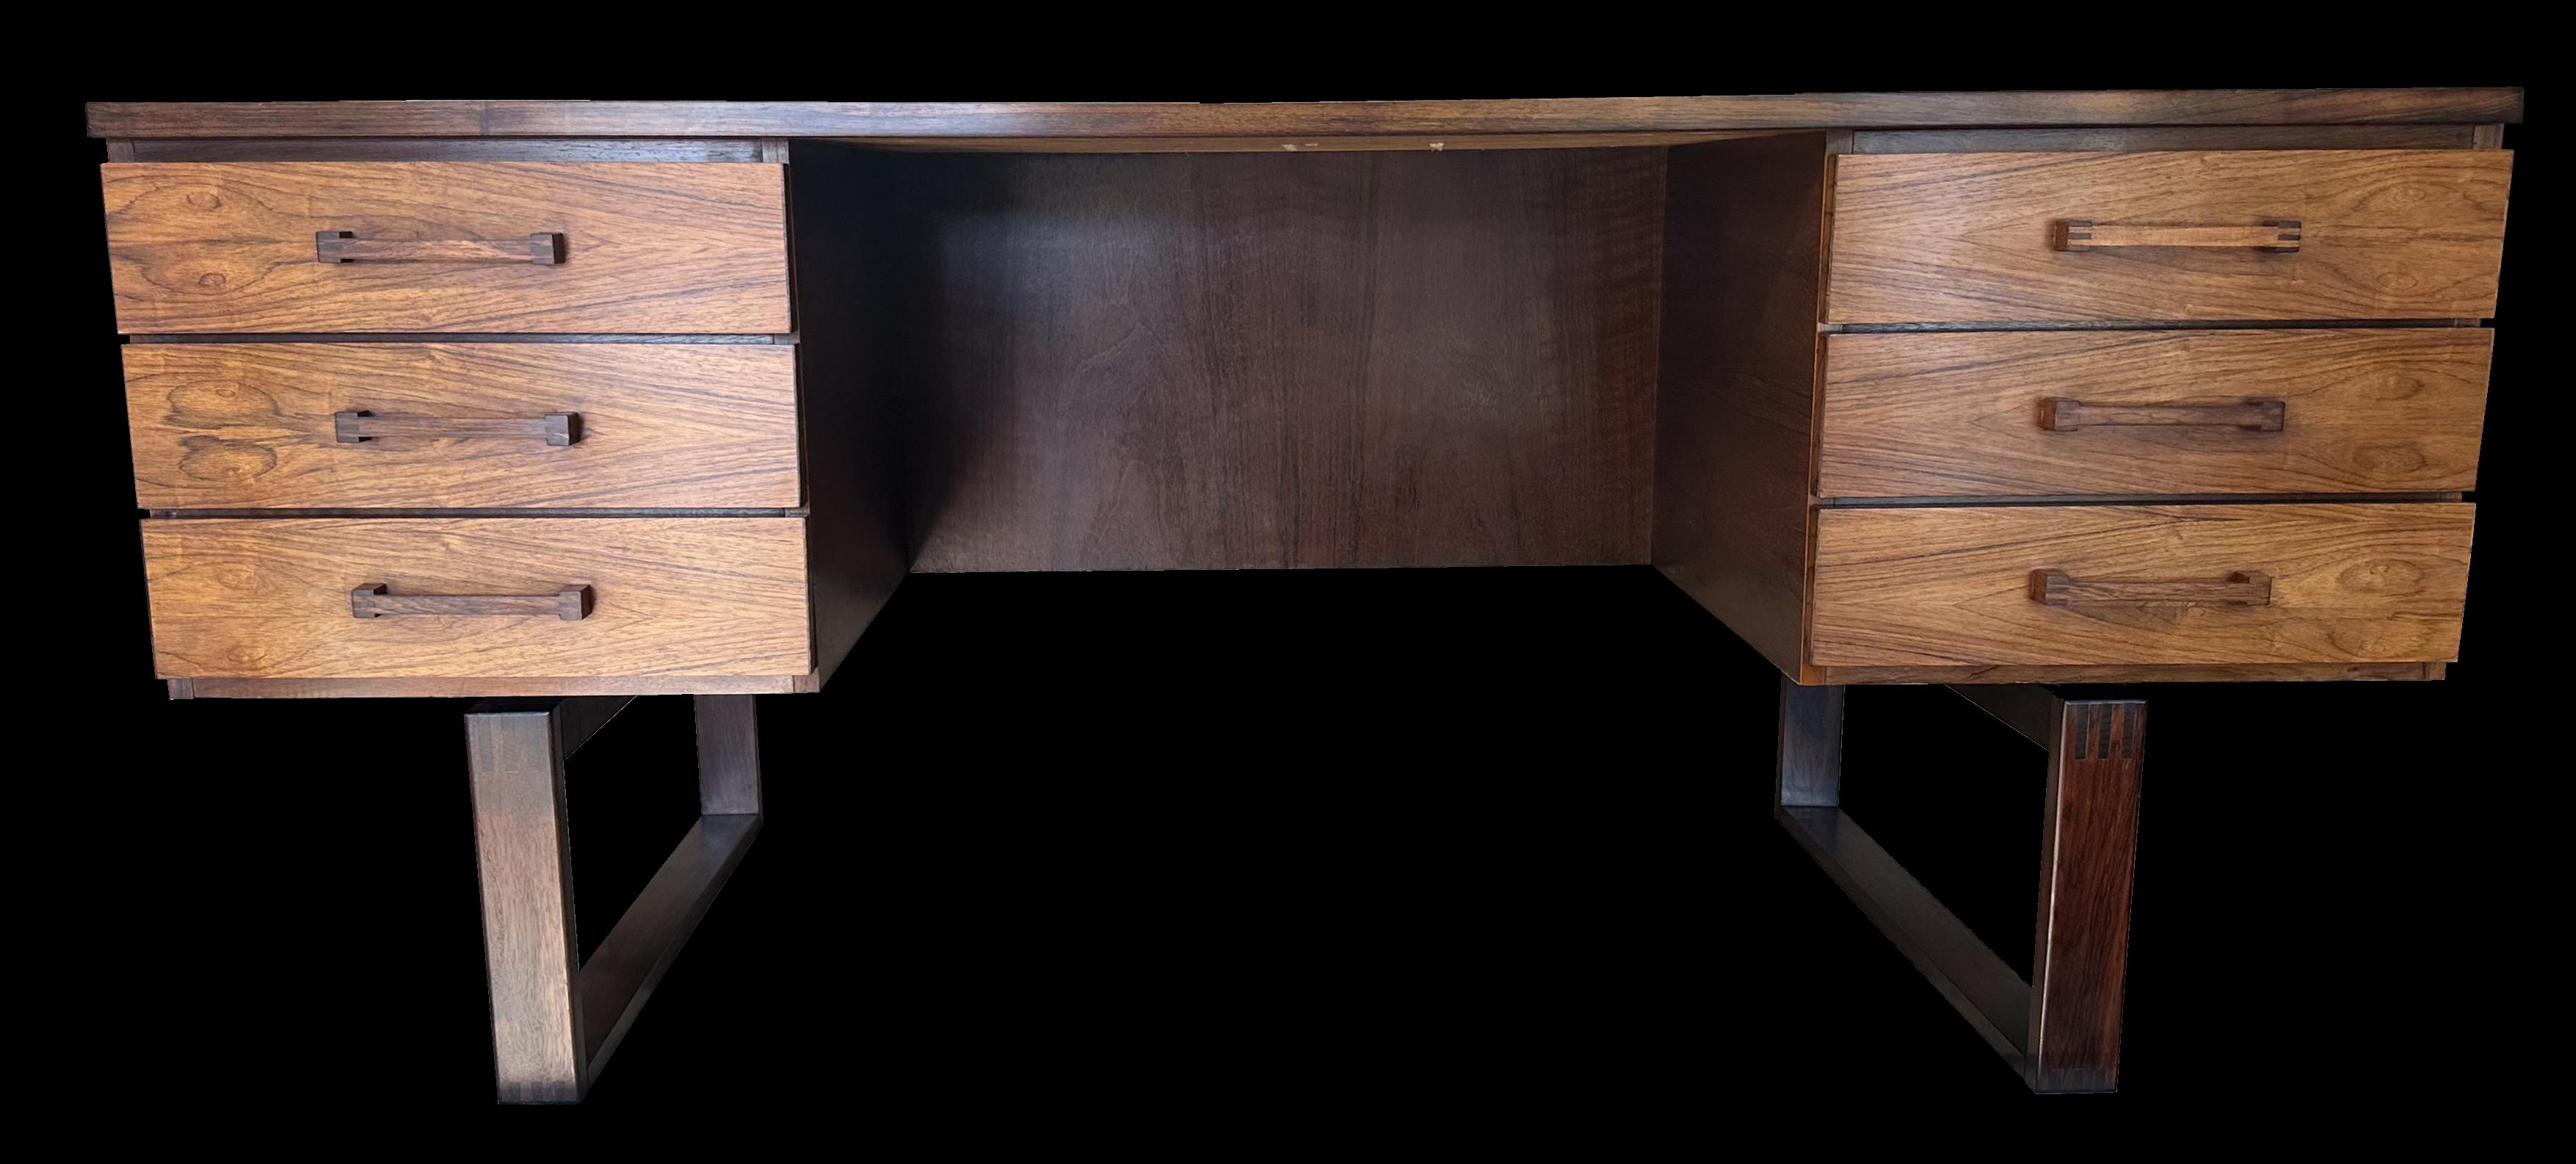 This model of desk by Valeur & Jensen rarely hang around for long and this one in particular has very nicely marked  grain. It is in fantastic condition, and ready for your home or work office. There are six equal sized drawers on one side, and an